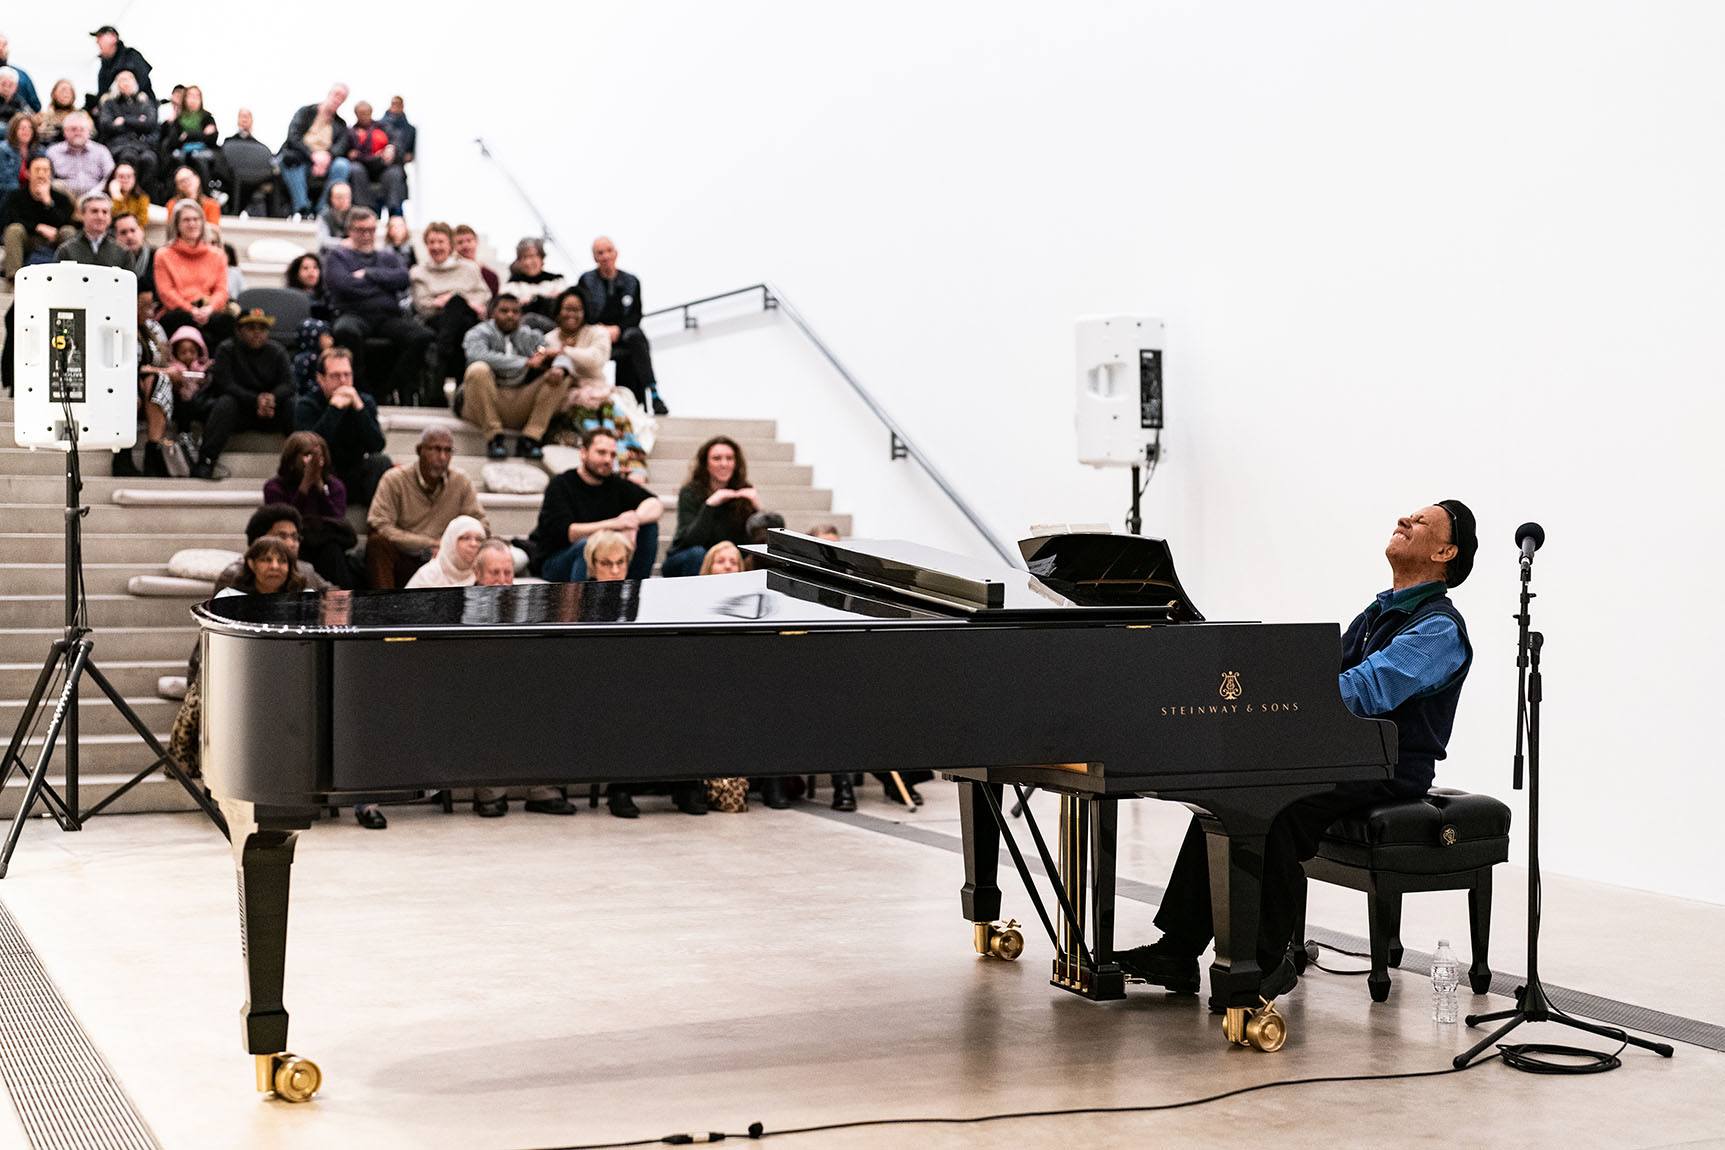 Jazz pianist Ptah Williams performing during the closing reception of "Barbara Chase-Riboud" Monumentale: "The Bronzes."